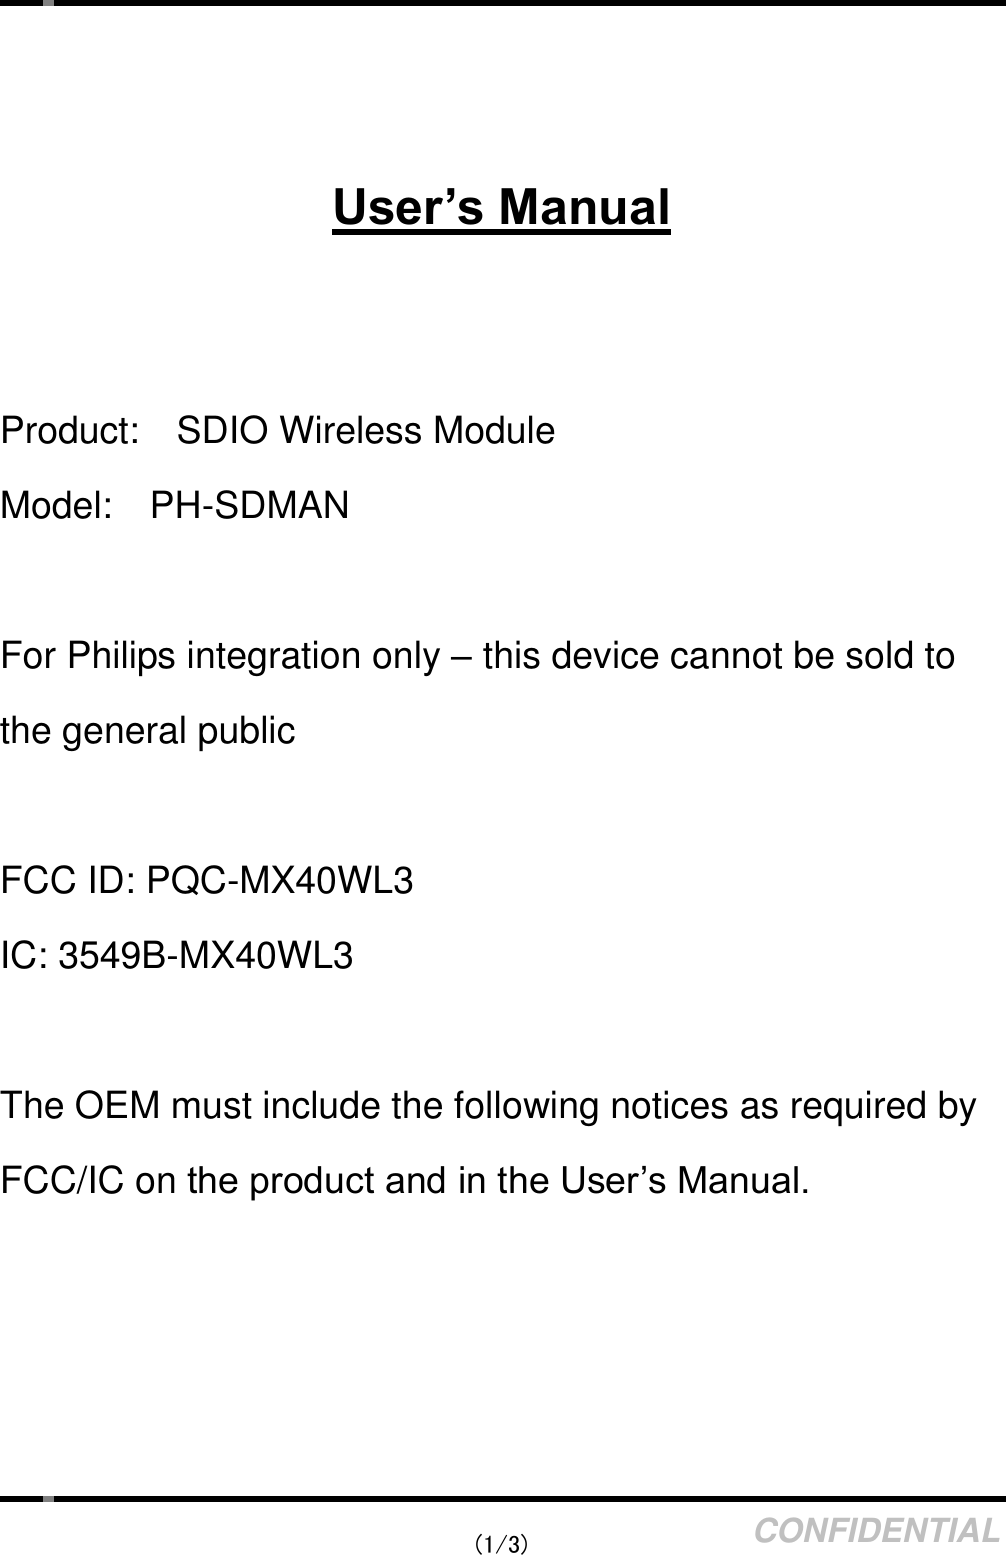    (1/3) CONFIDENTIAL    User’s Manual   Product:    SDIO Wireless Module Model:    PH-SDMAN  For Philips integration only – this device cannot be sold to the general public  FCC ID: PQC-MX40WL3 IC: 3549B-MX40WL3  The OEM must include the following notices as required by FCC/IC on the product and in the User’s Manual. 